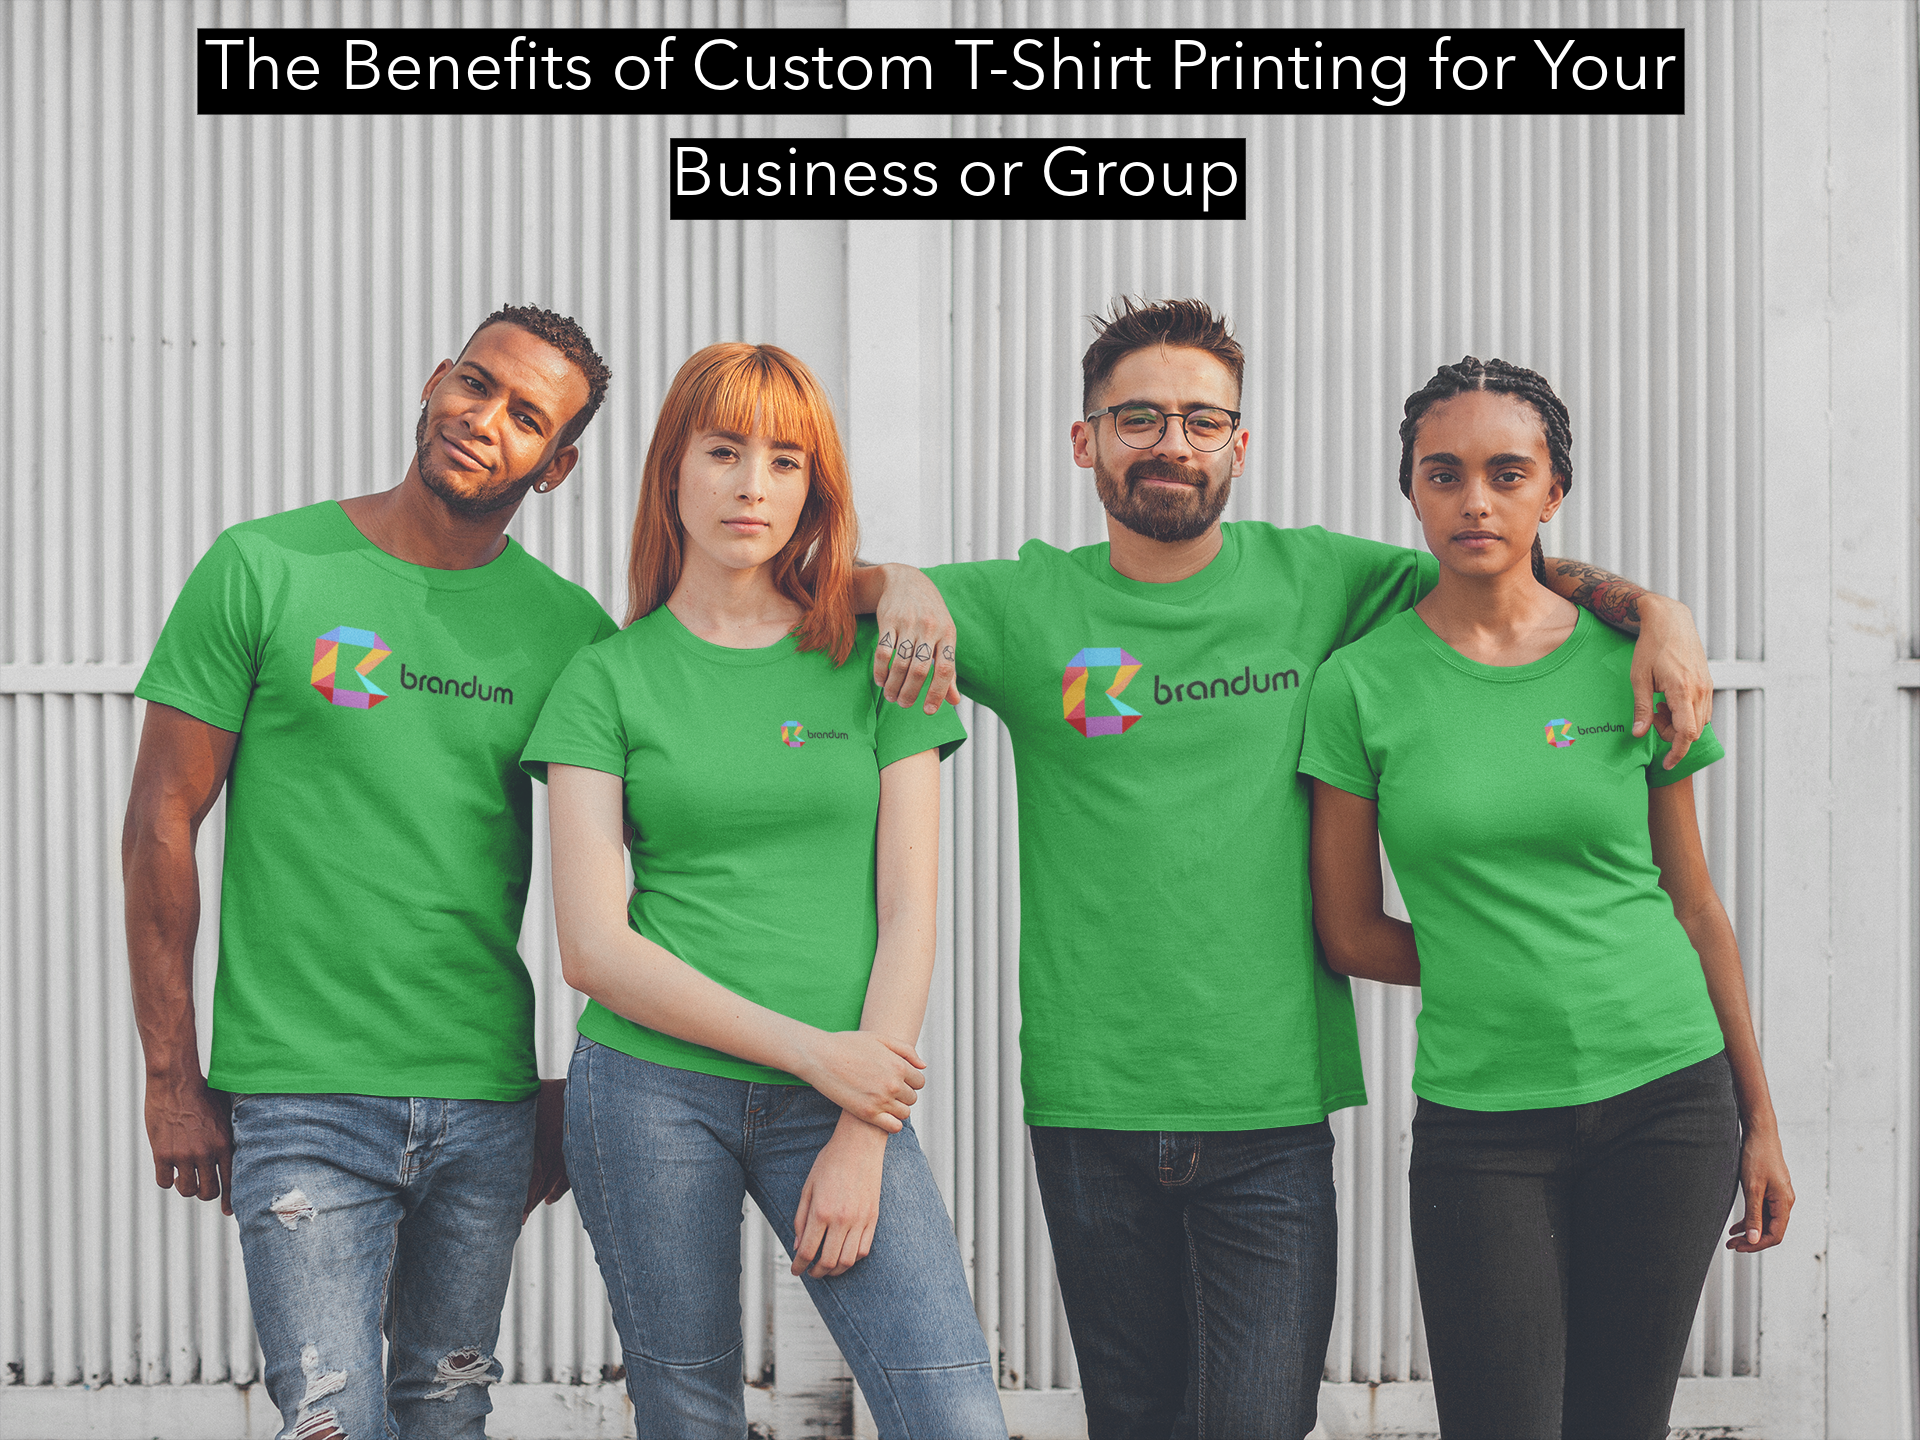 The Benefits of Custom T-Shirt Printing for Your Business or Group